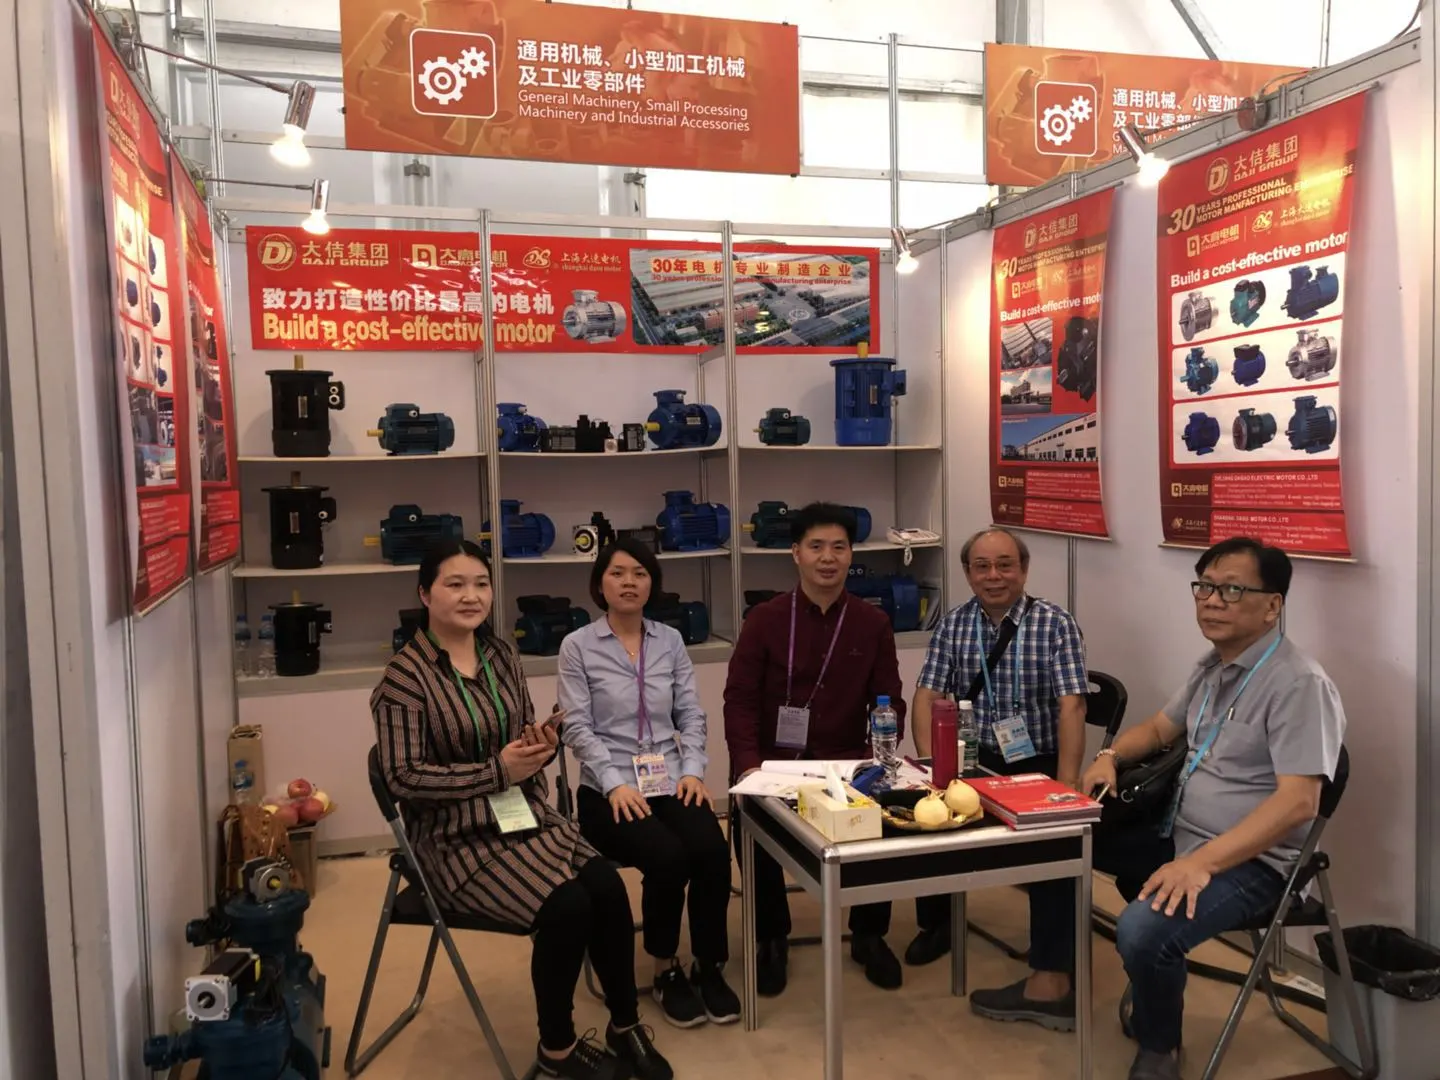 DAGAO MOTOR ACTIVELY PARTICIPATED IN THE 123 CANTON FAIR